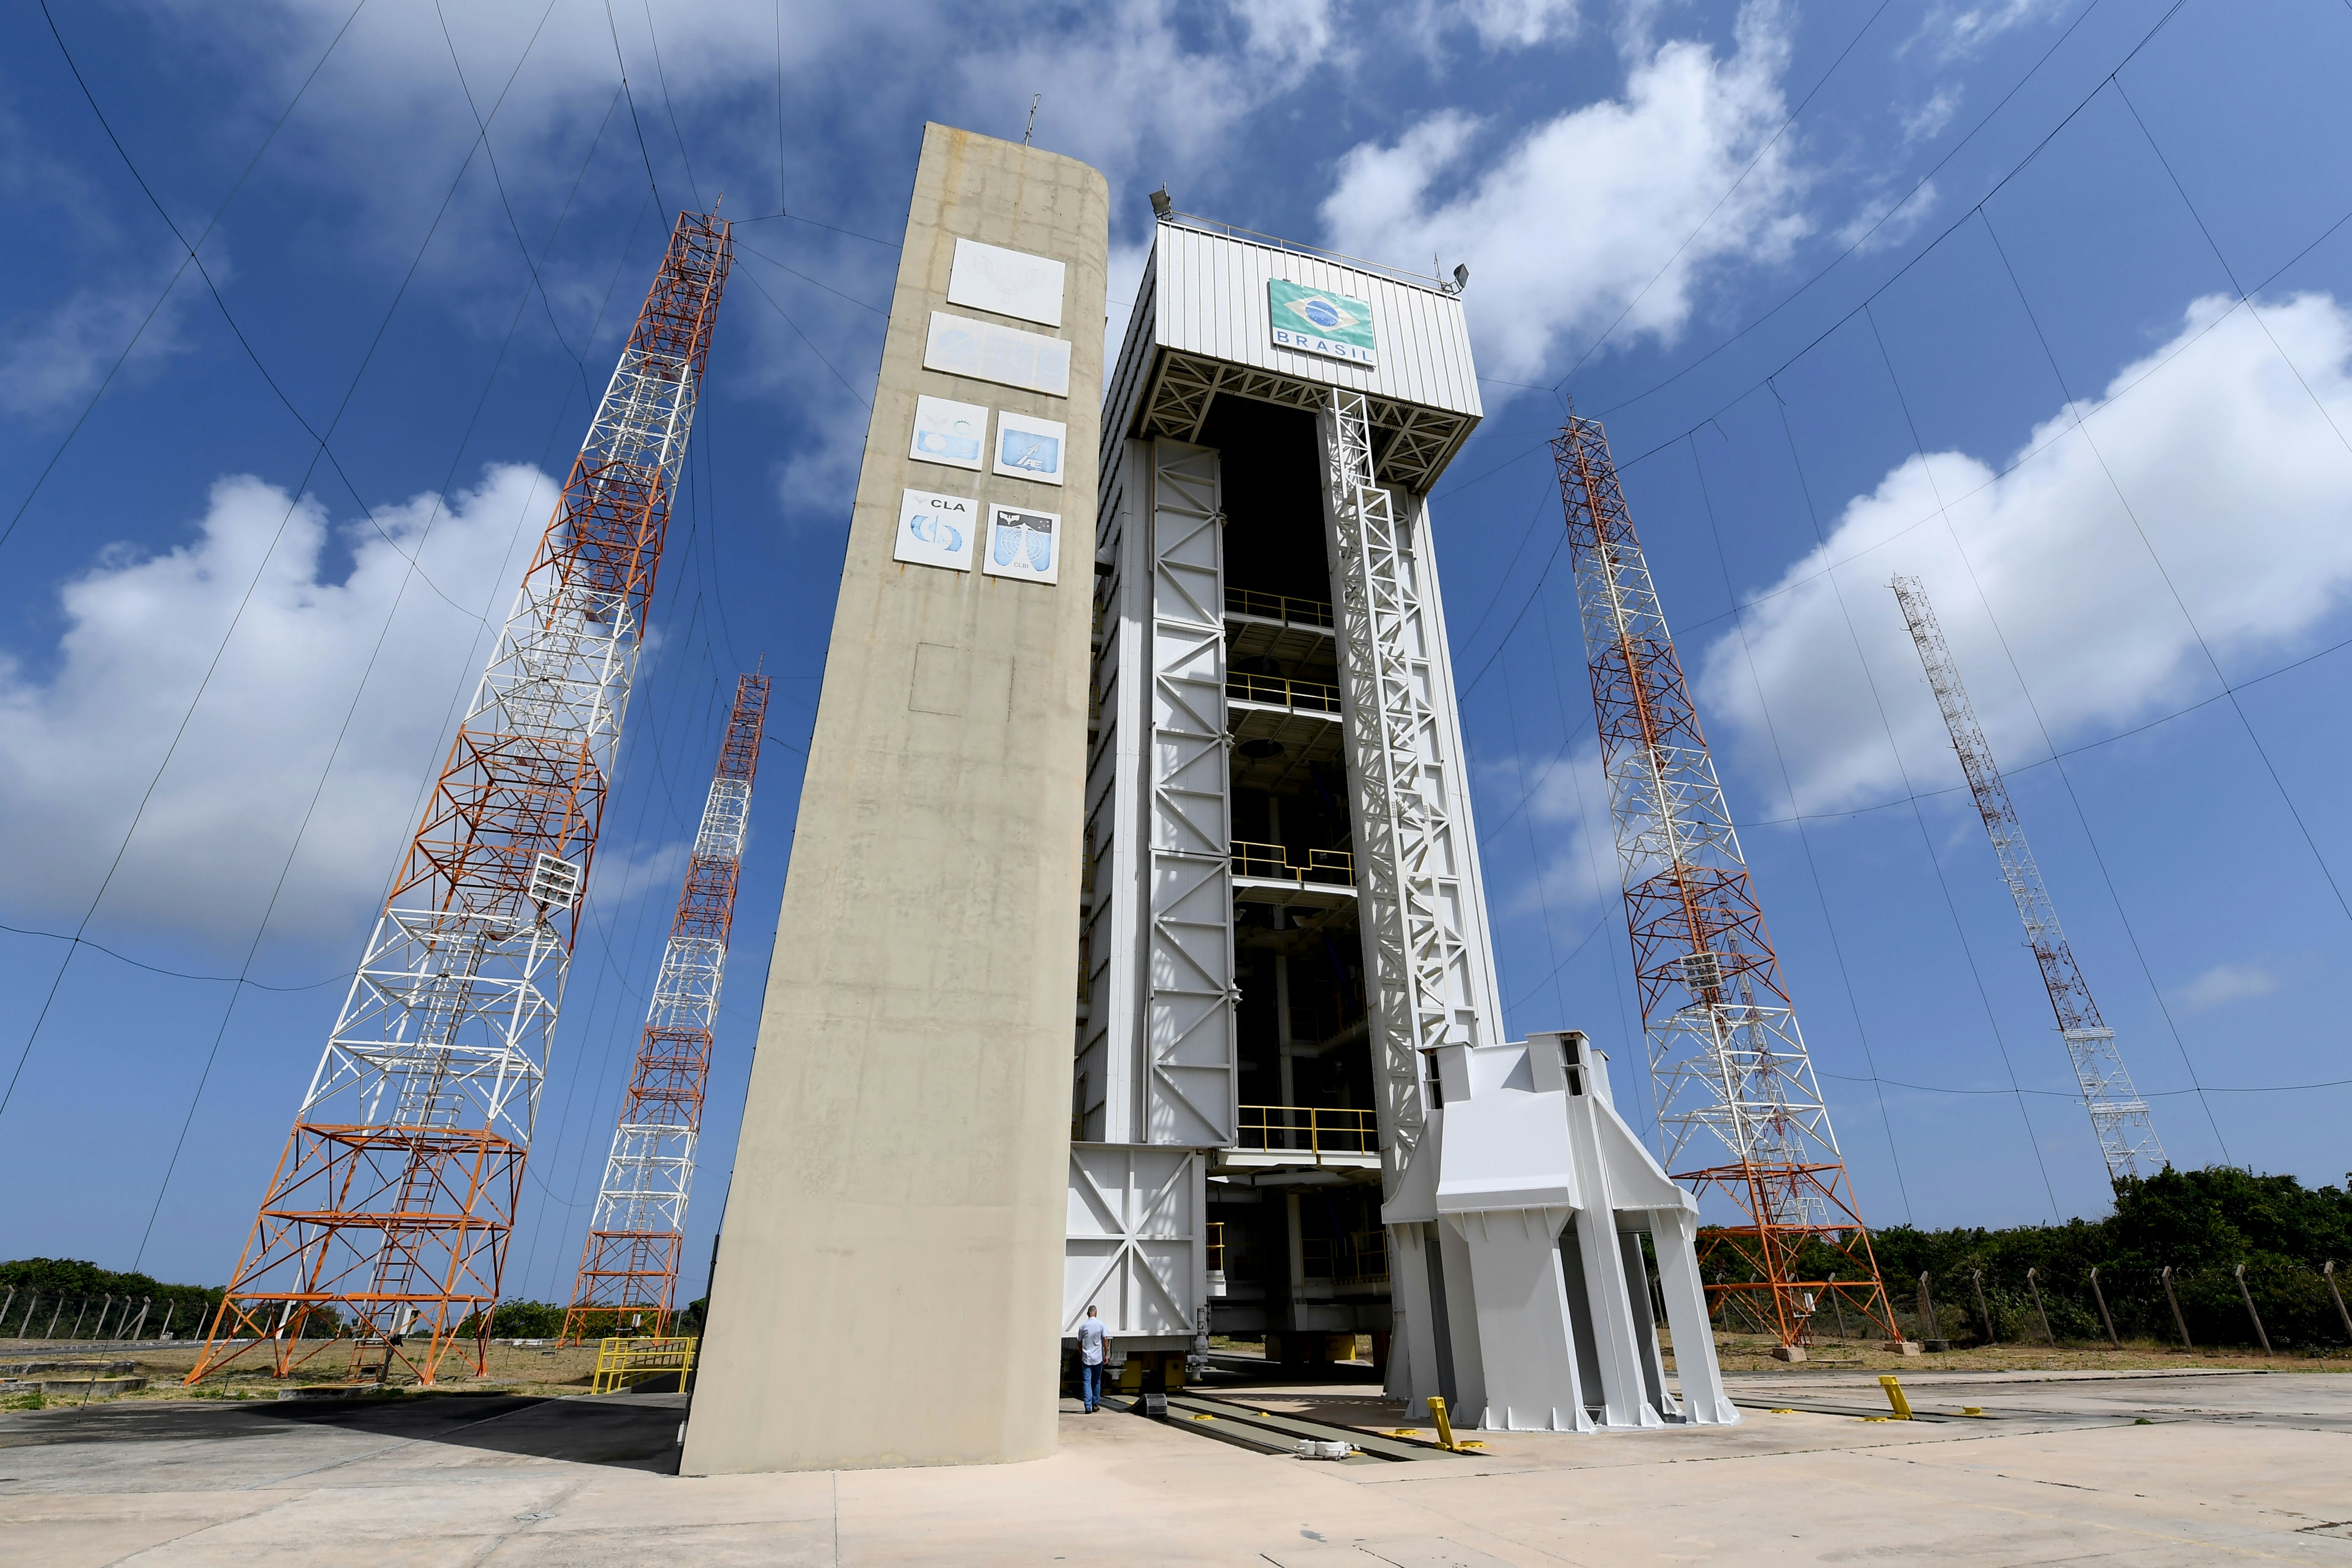 Rocket launch tower at Alcântara Launch Center (CLA) in Alcantara, Maranhao State, Brazil, on September 14, 2018. - The CLA is a satellite launching facility of the Brazilian Space Agency and is operated by the Brazilian Air Force. The CLA is the closest launching base to the equator. There are also plans to launch several international rockets from Alcântara. In the beginning of 2018, Brazilian government offered the possibility to use the spaceport to several U.S. companies. (Photo by EVARISTO SA / AFP) (Photo credit should read EVARISTO SA/AFP/Getty Images)